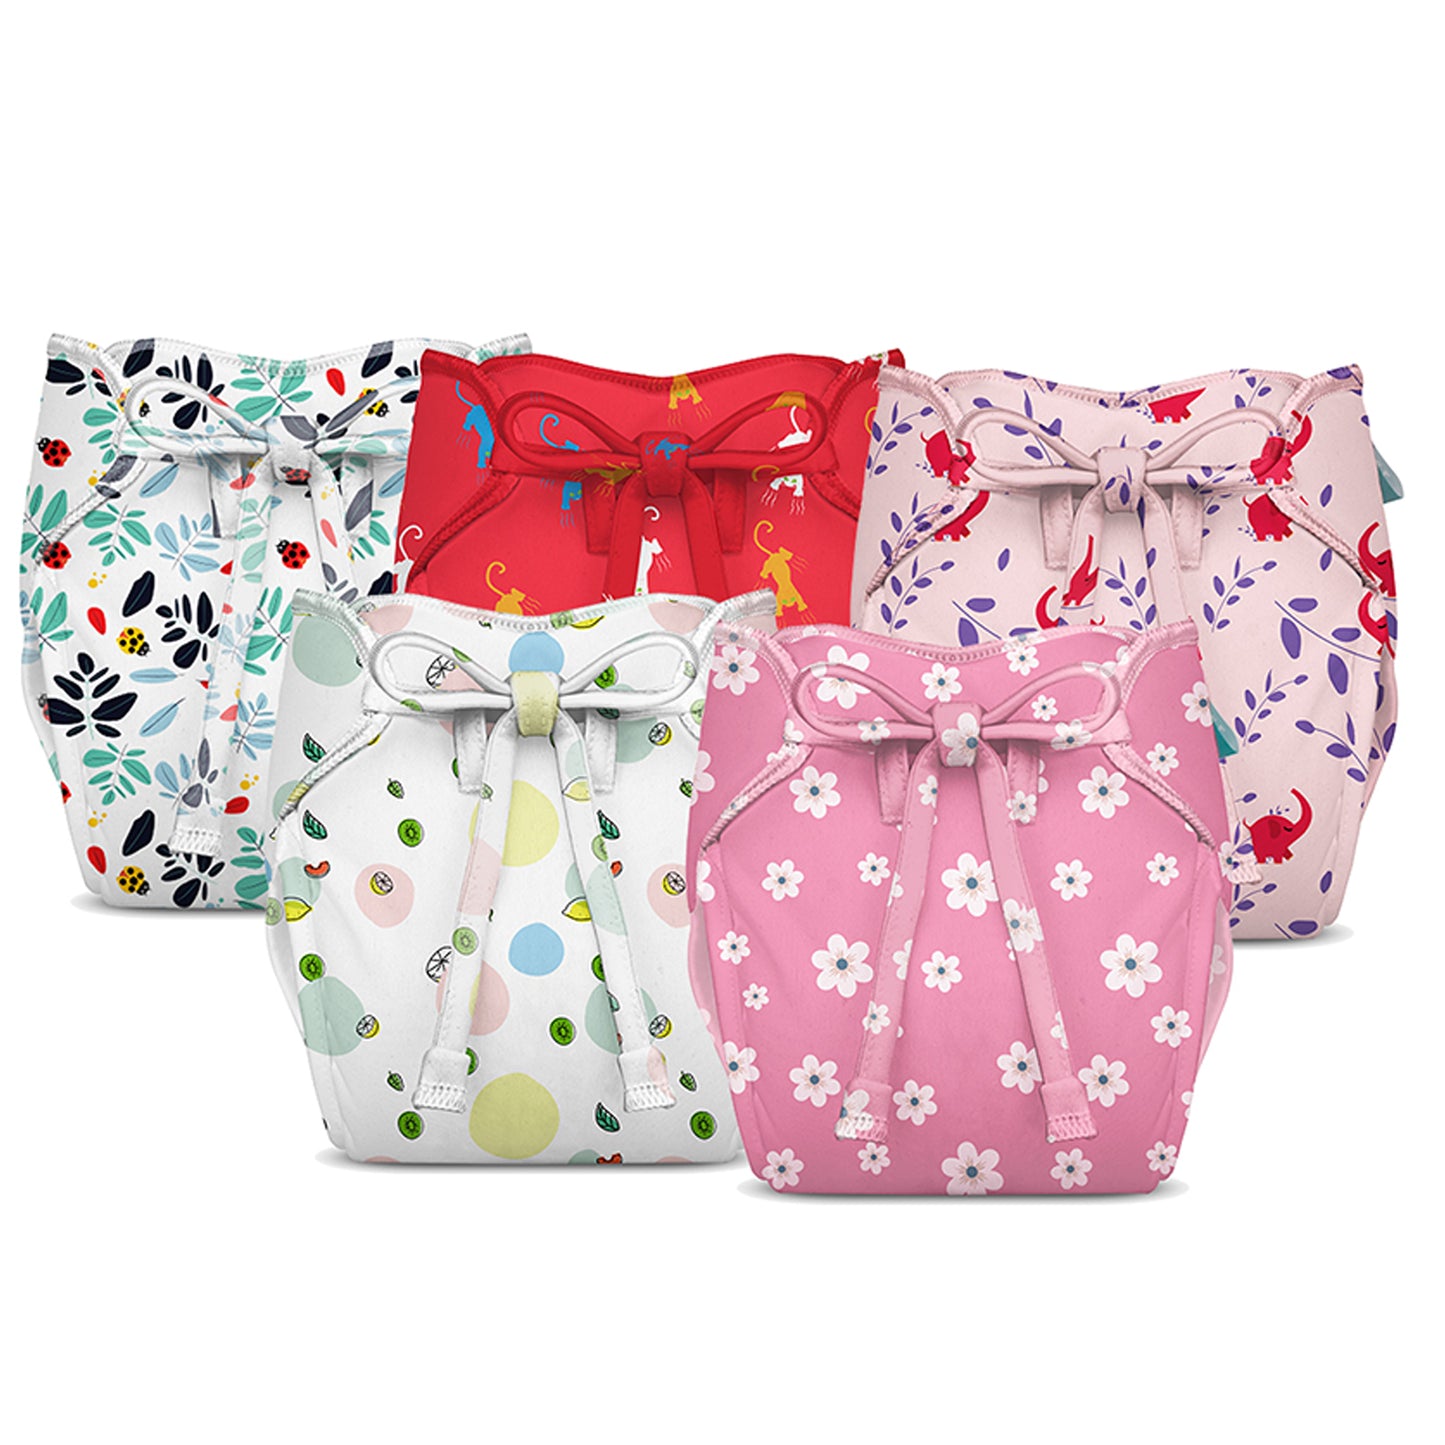 5 Piece Pack of New & Improved Smart Nappy for 0-3 months old Infants (Size XS)